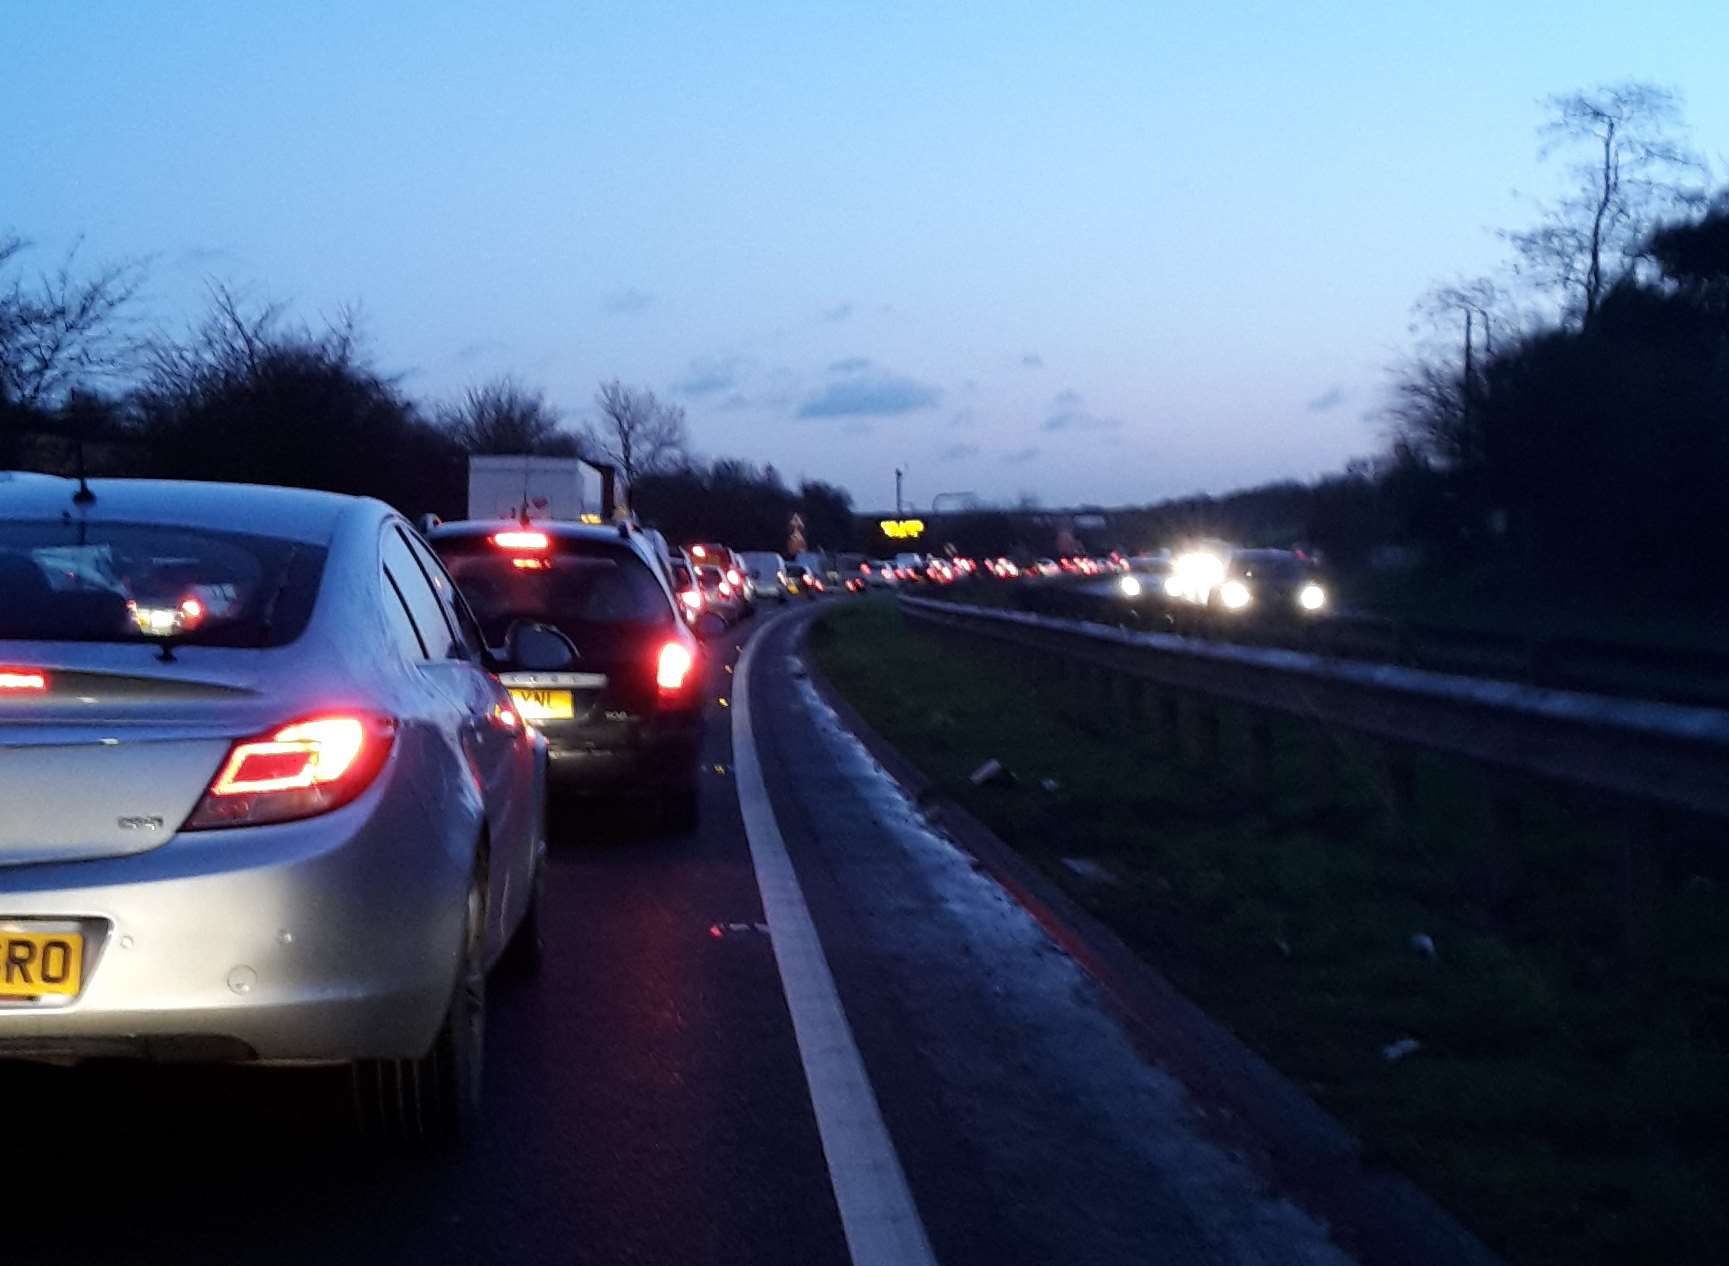 Traffic queuing on the A249 at Stockbury